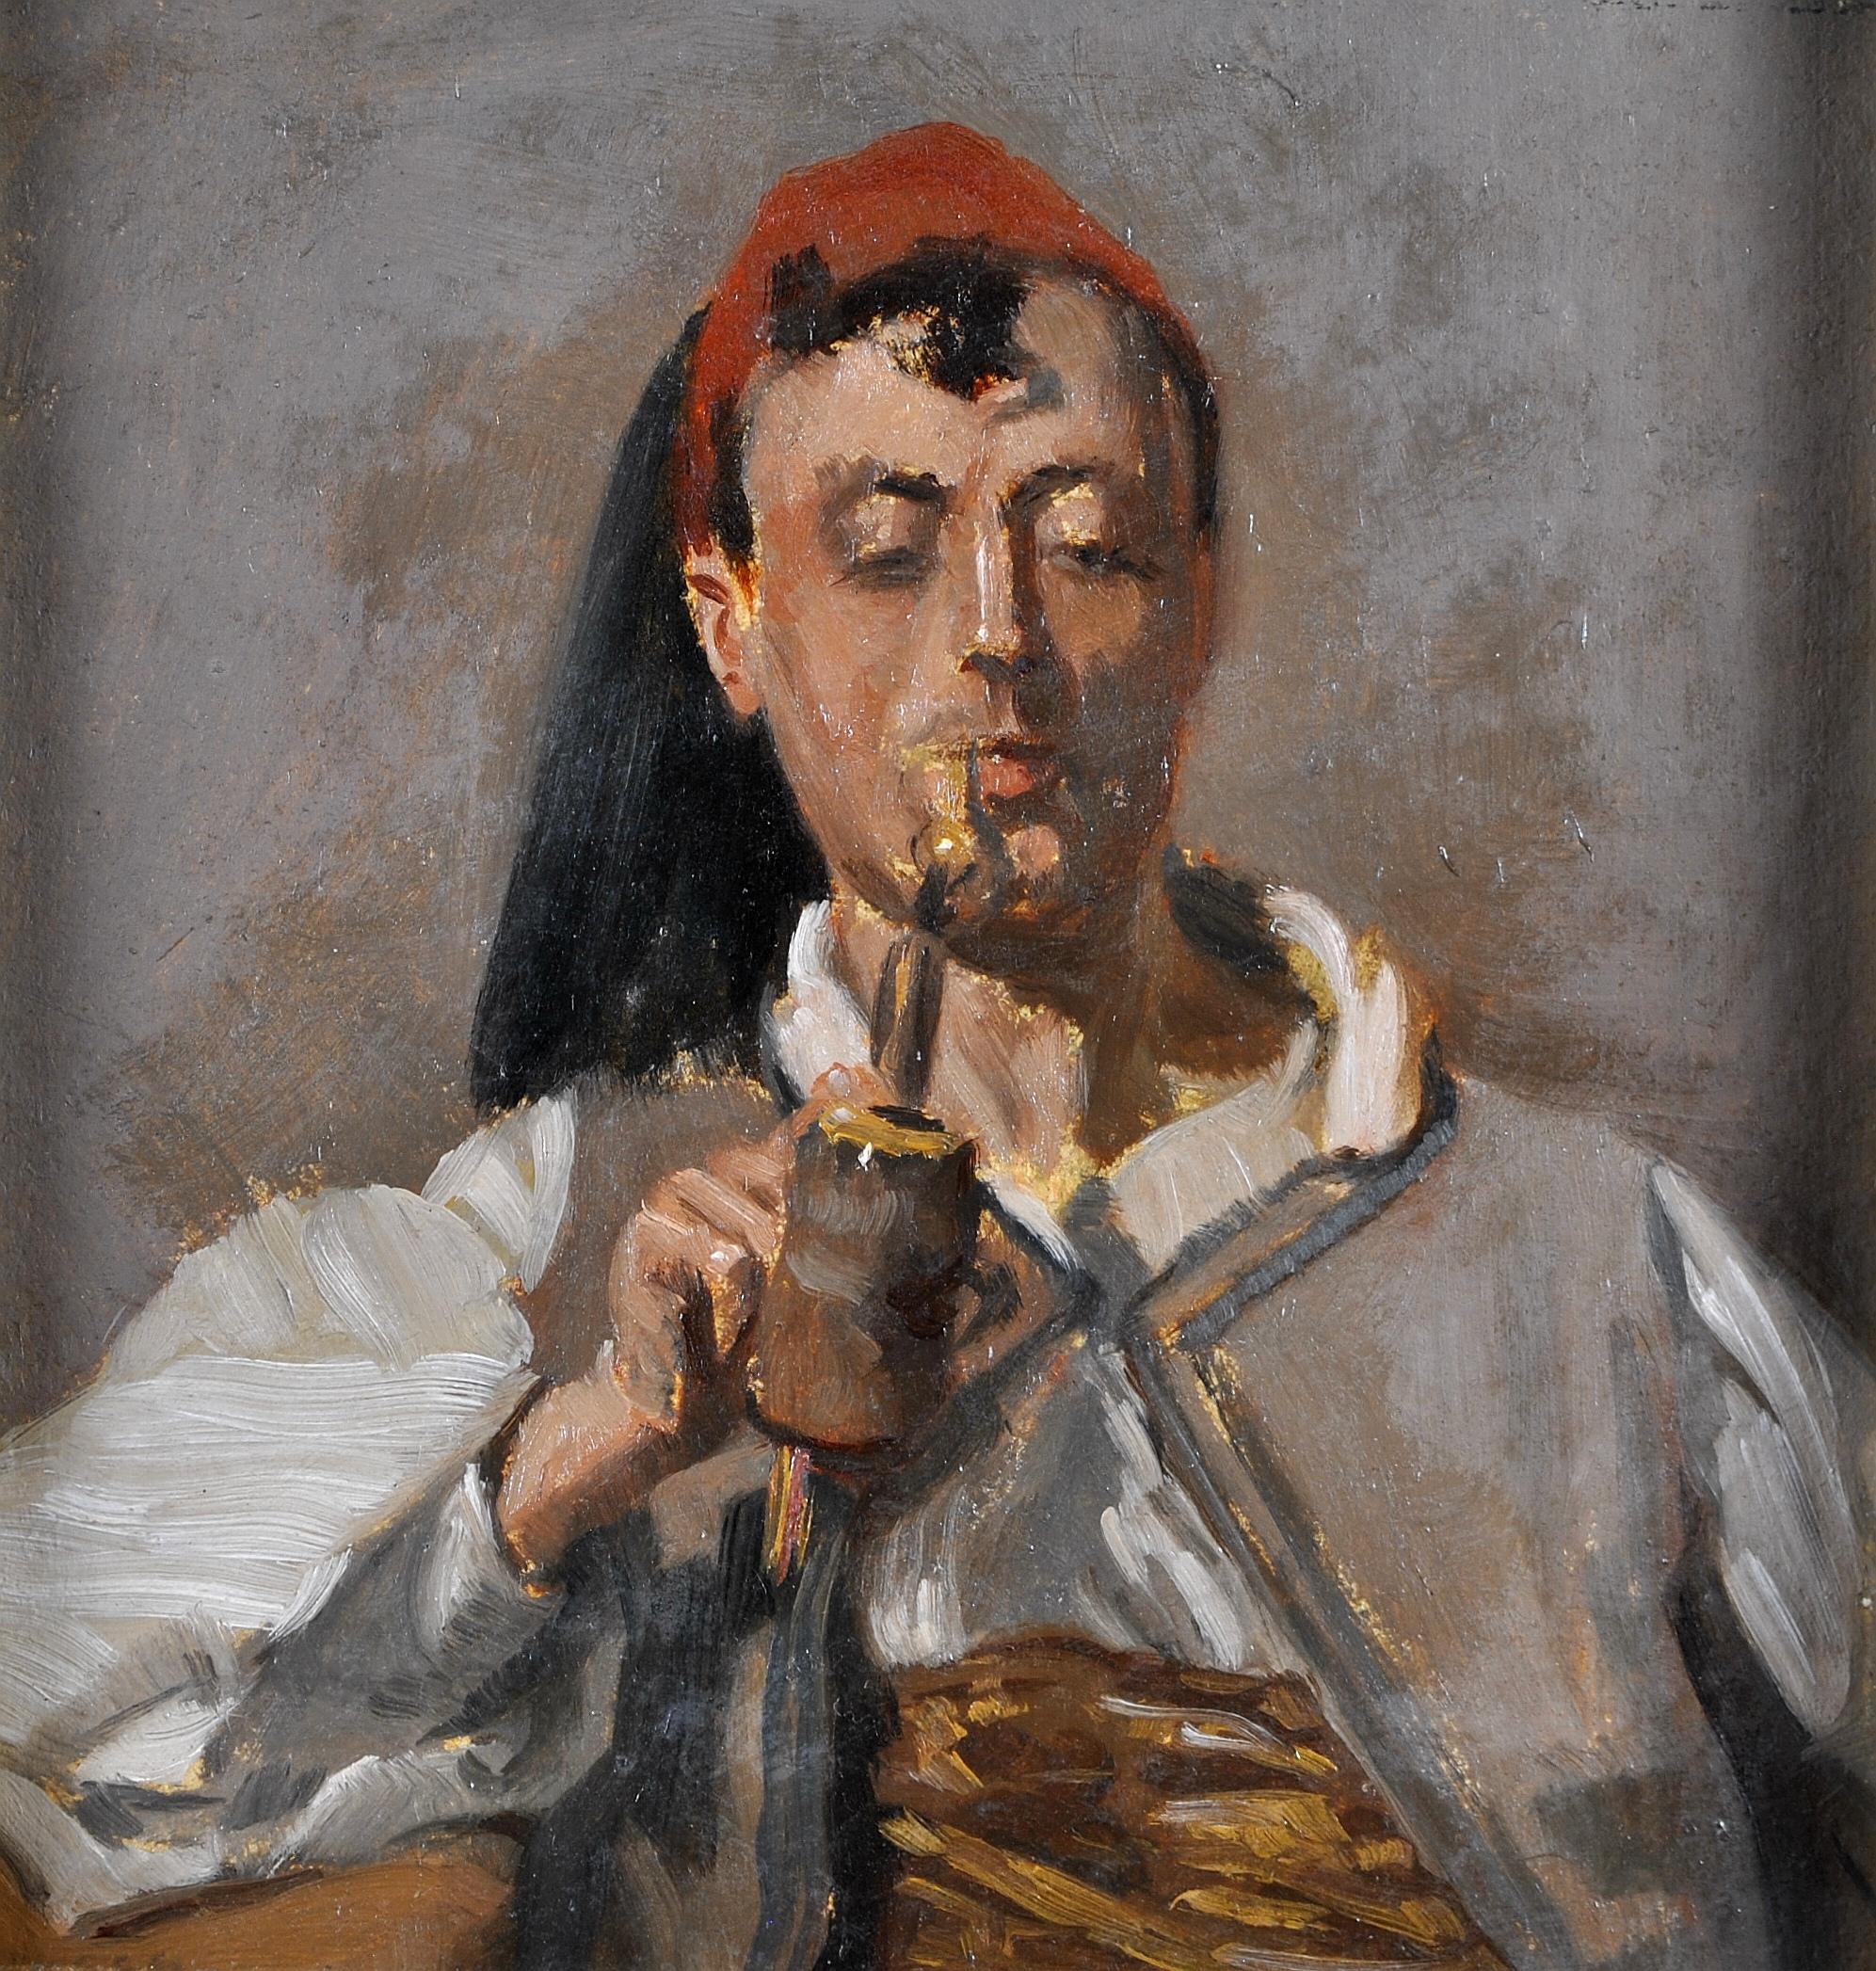 North African Man Smoking a Pipe - Antique British Orientalist Portrait Painting For Sale 2